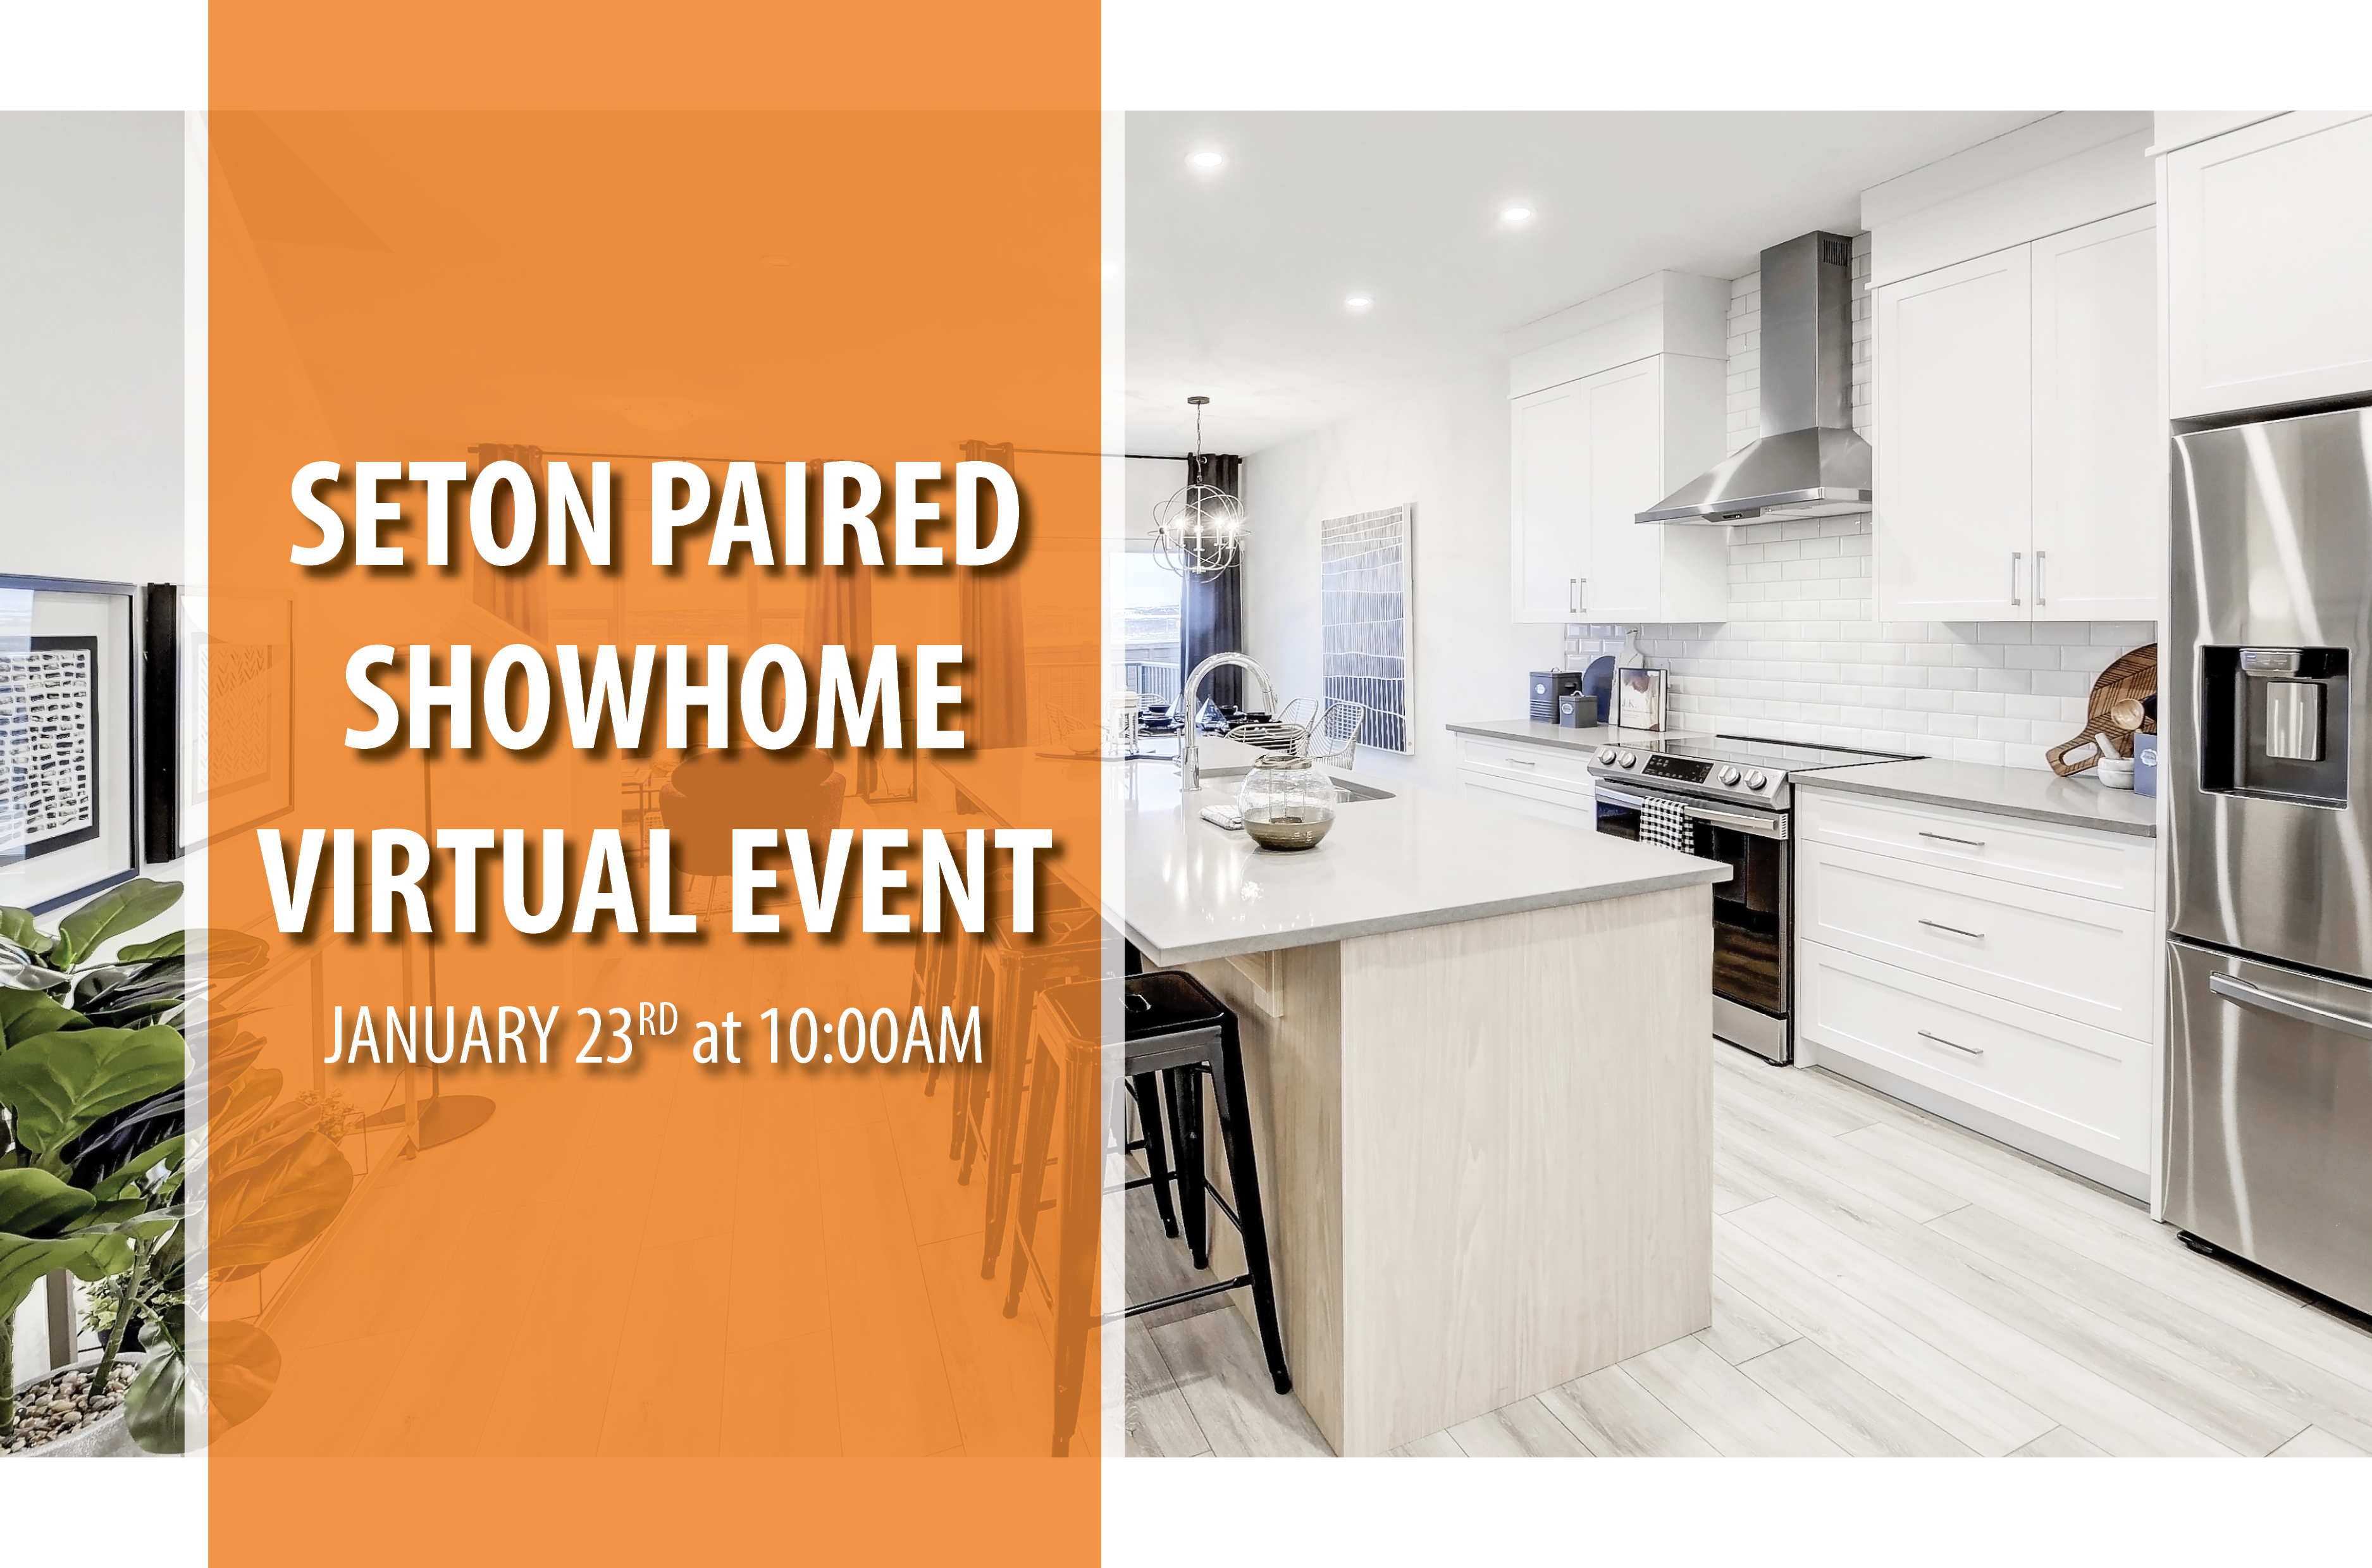 Seton Paired Home Virtual Event